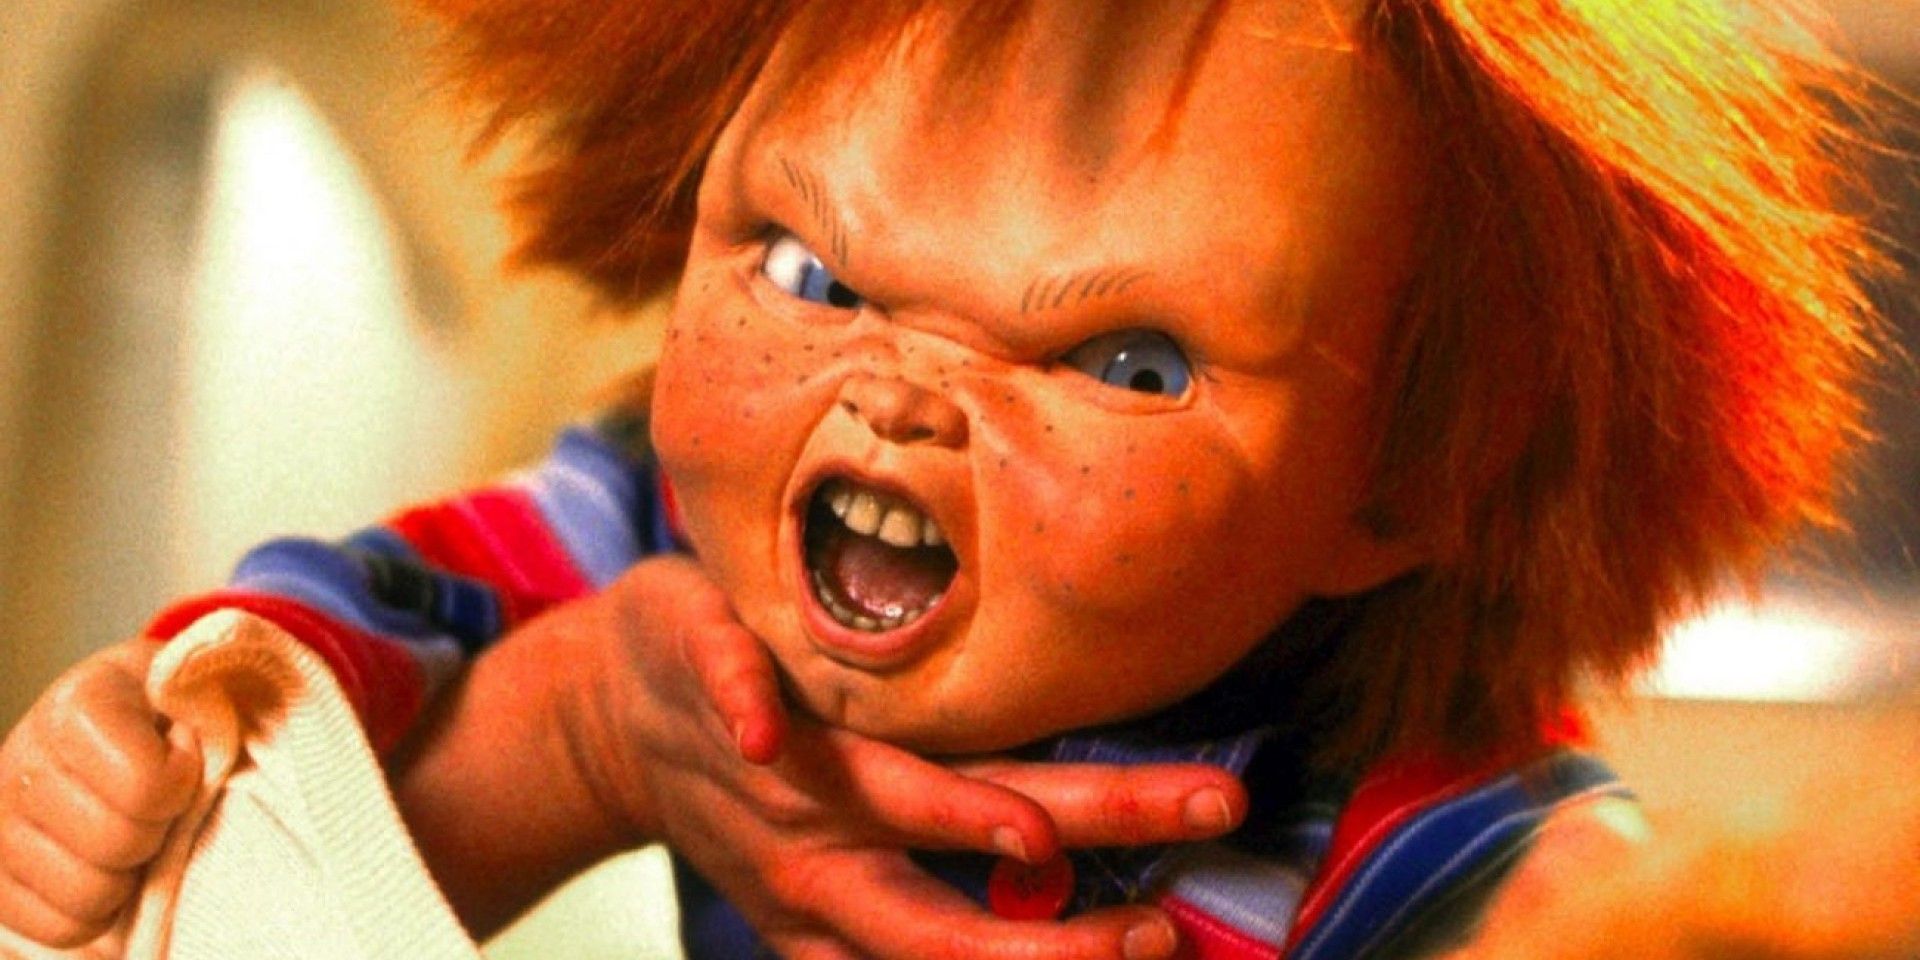 Chucky looking angry in the middle of a fight in the original Child's Play